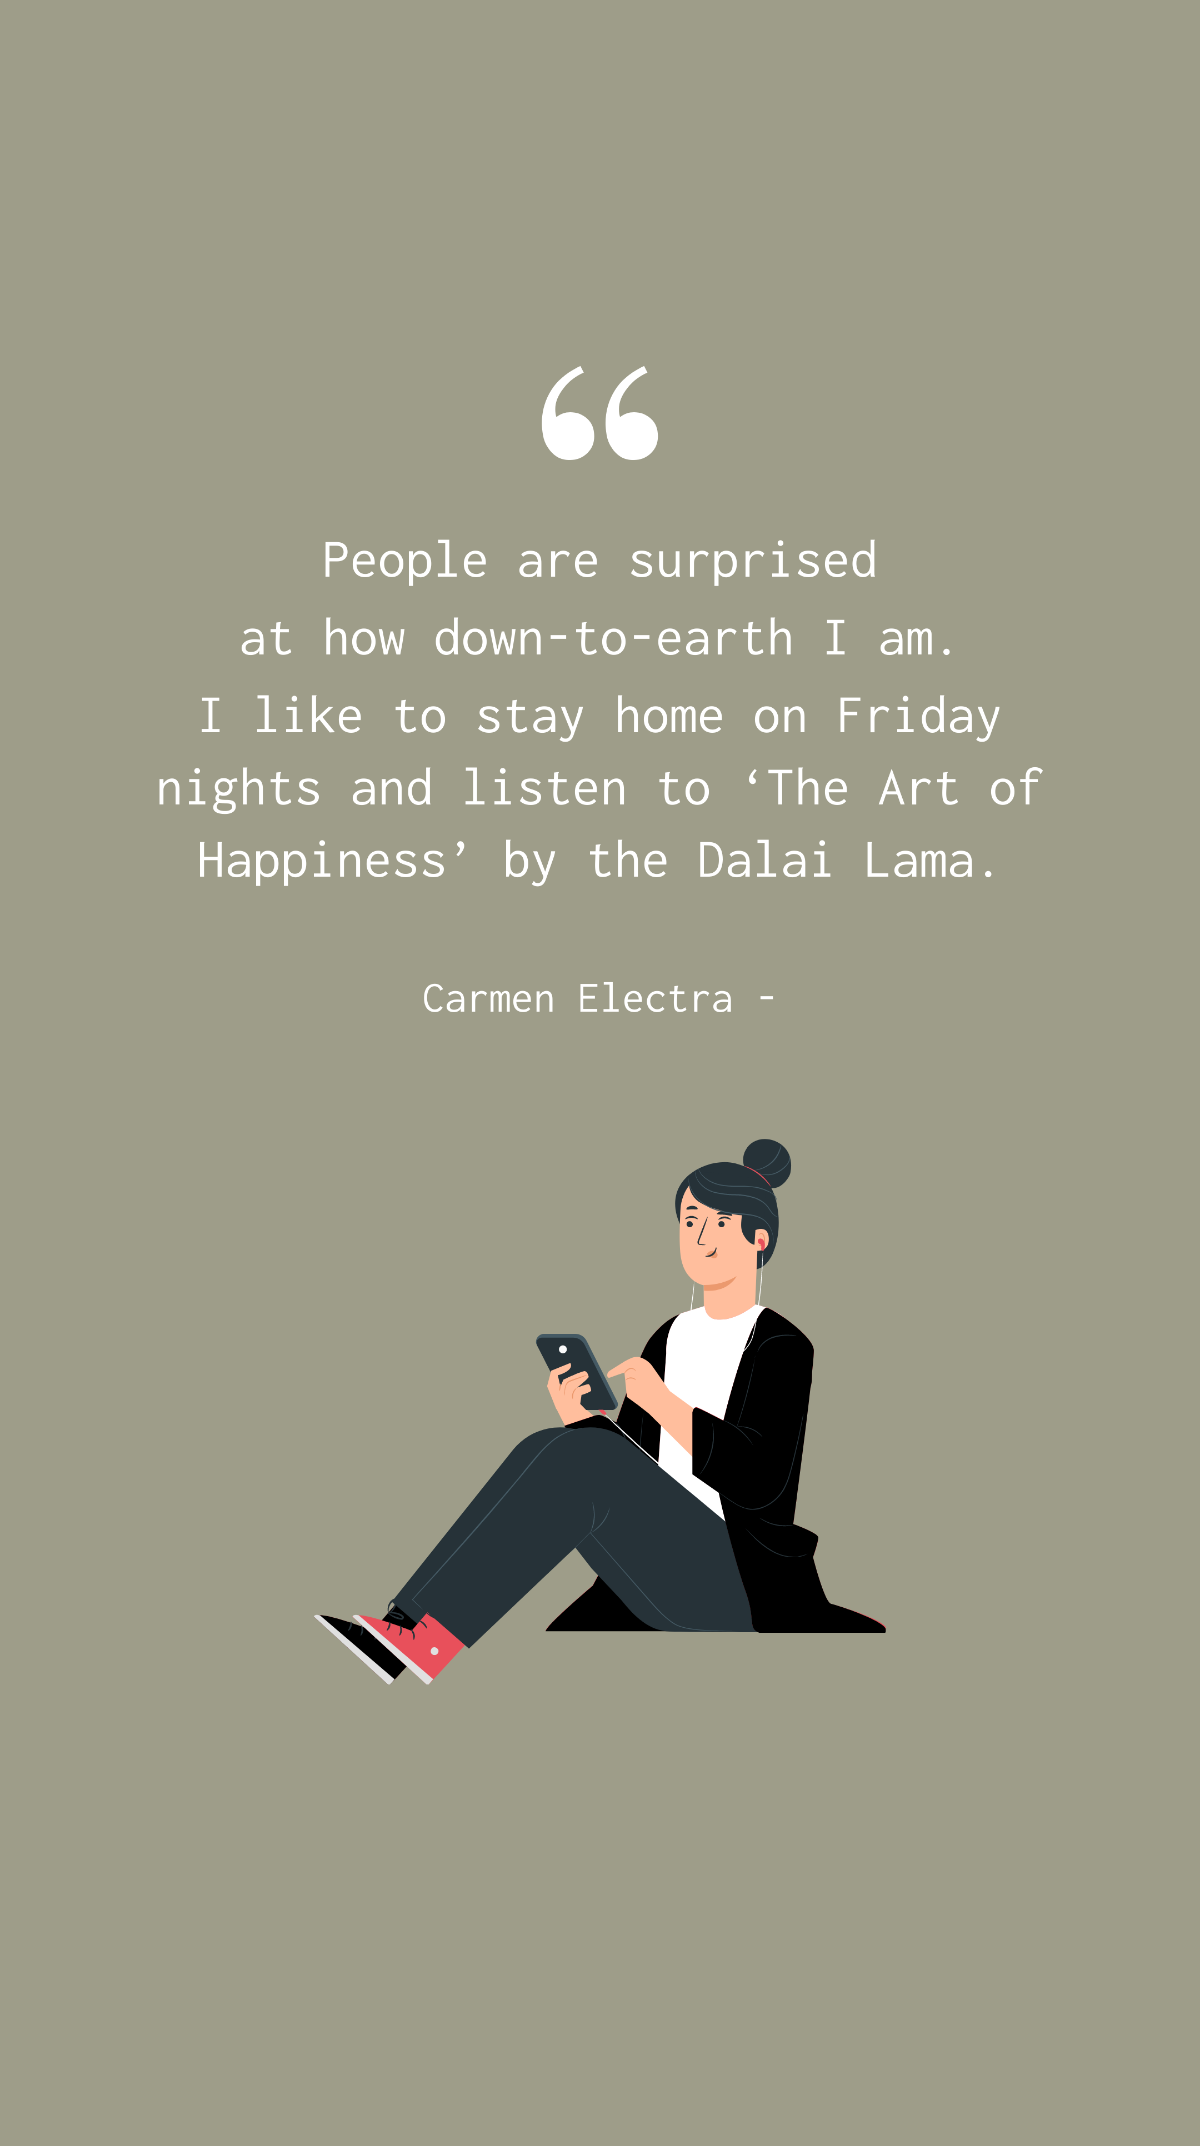 Carmen Electra - People are surprised at how down-to-earth I am. I like to stay home on Friday nights and listen to ‘The Art of Happiness’ by the Dalai Lama. Template